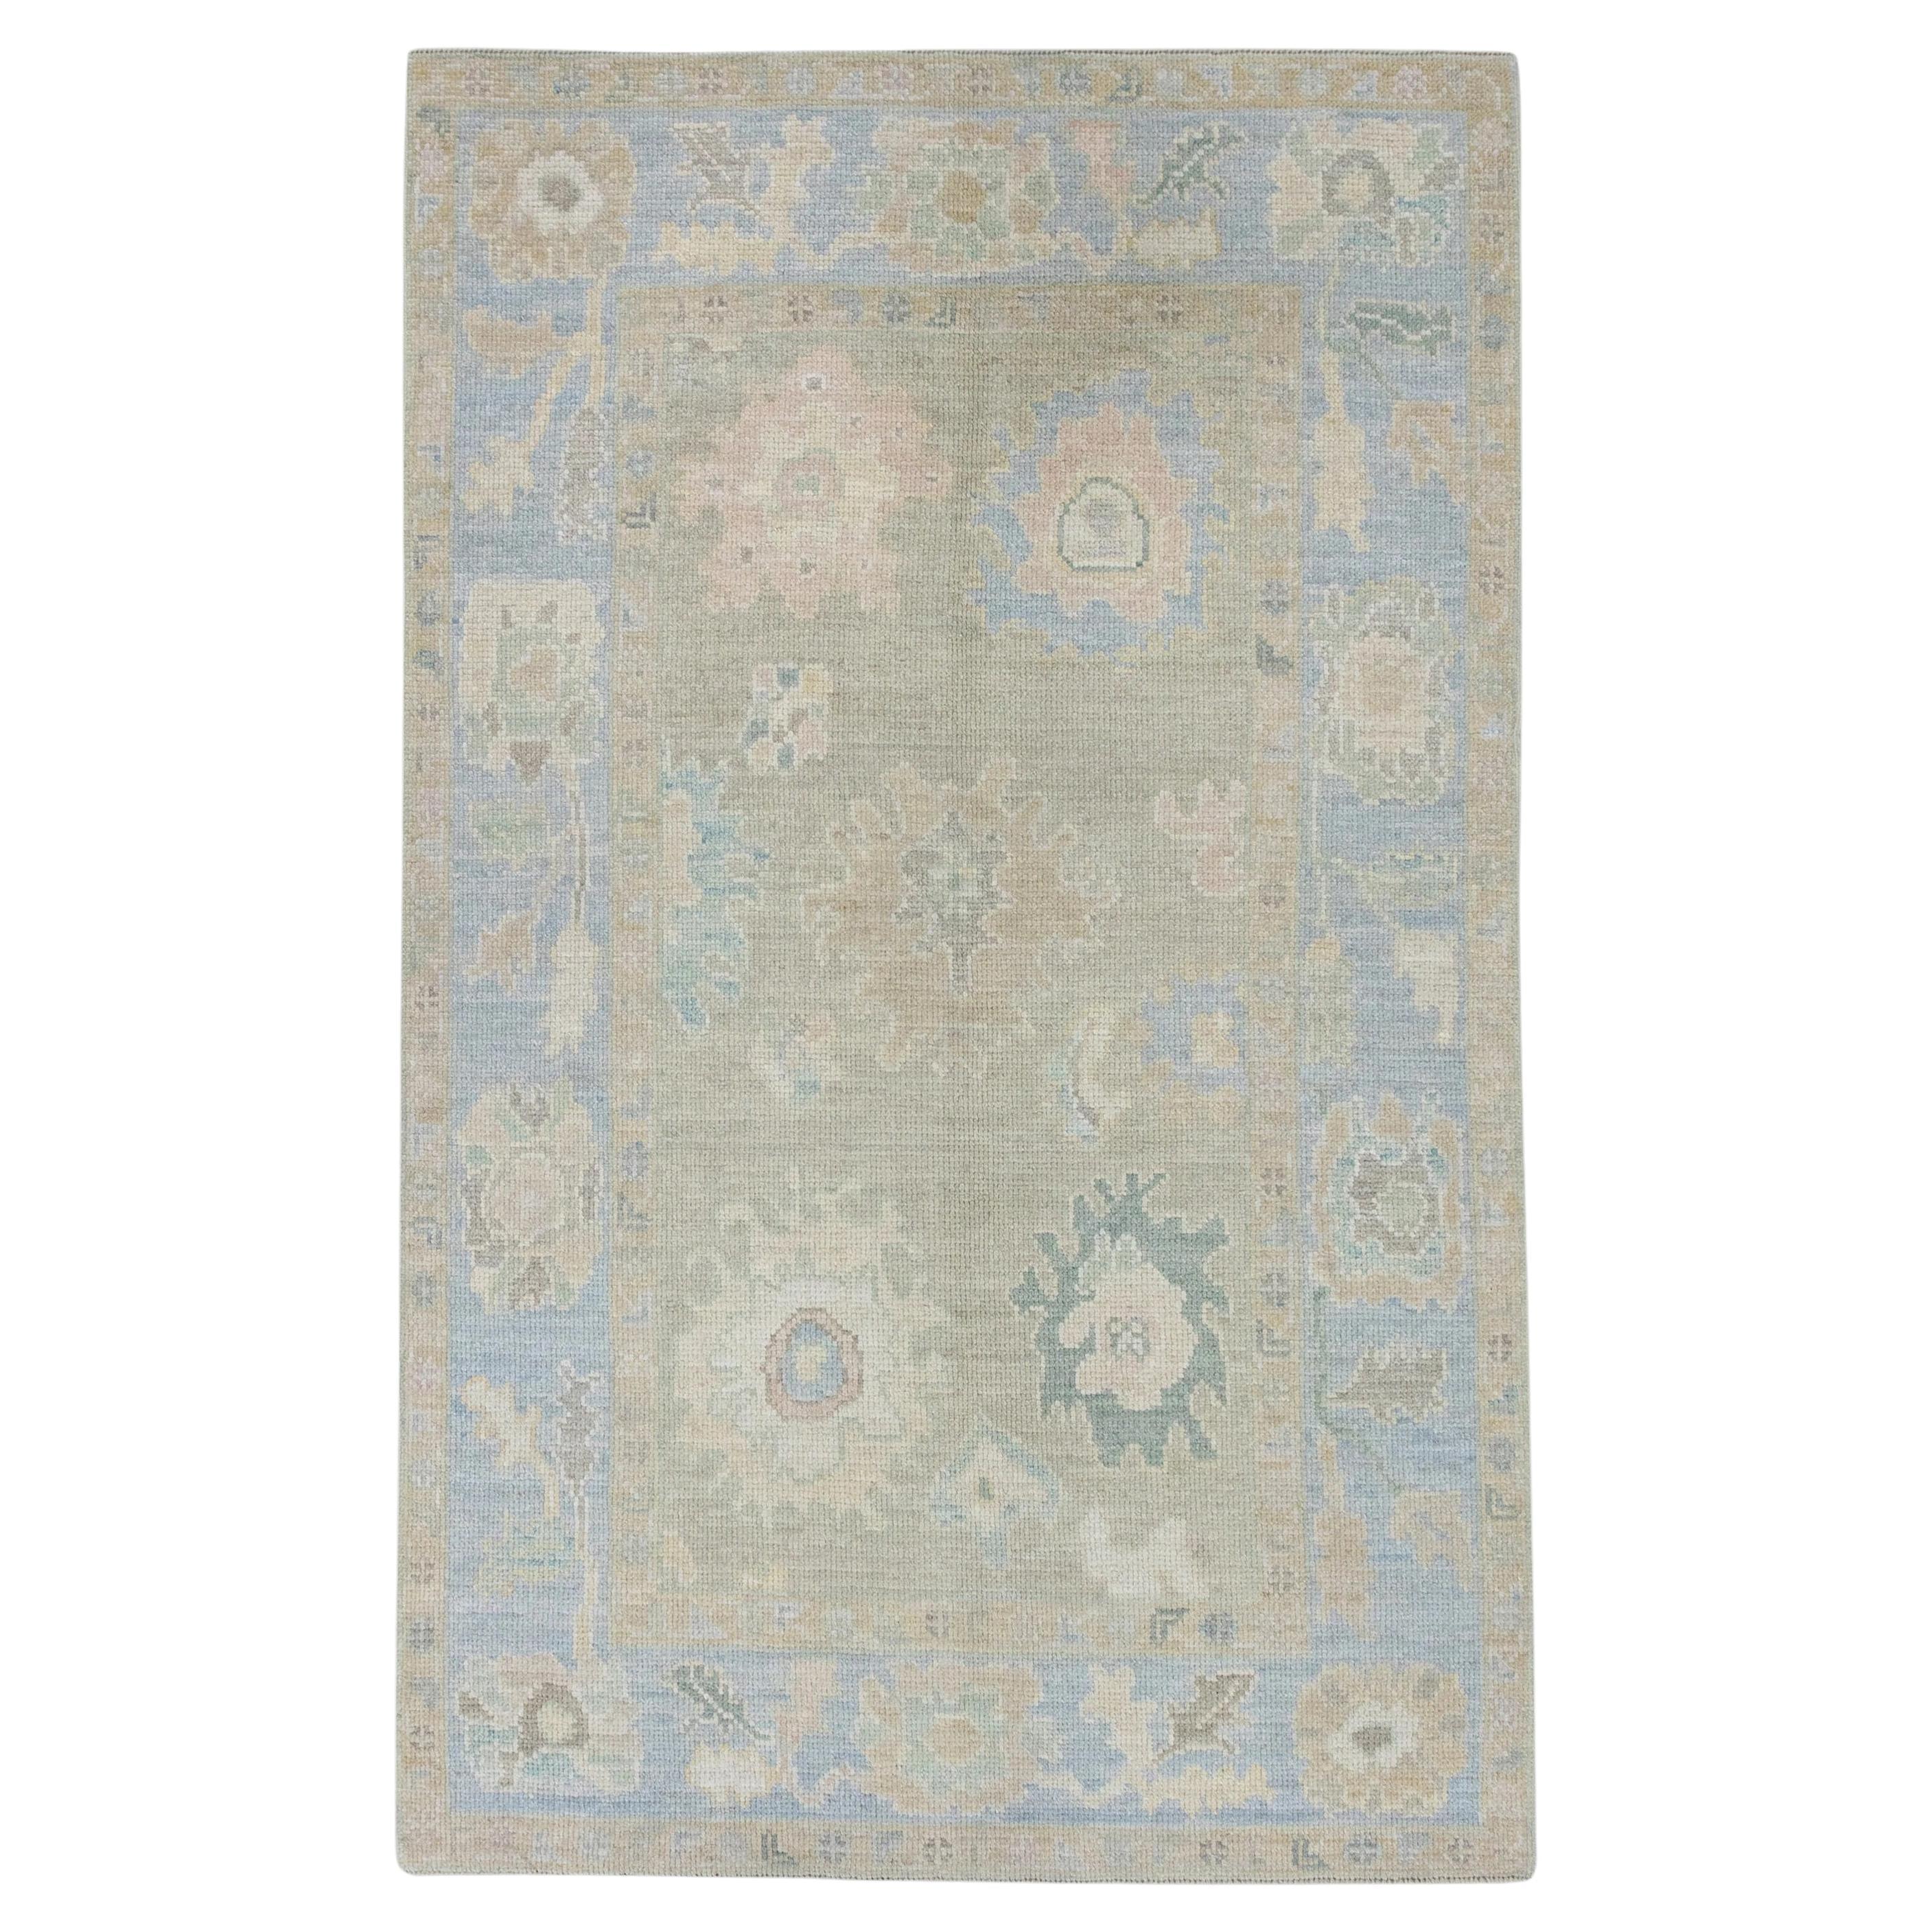 Brown and Blue Floral Handwoven Wool Turkish Oushak Rug 4'2" x 6'9" For Sale